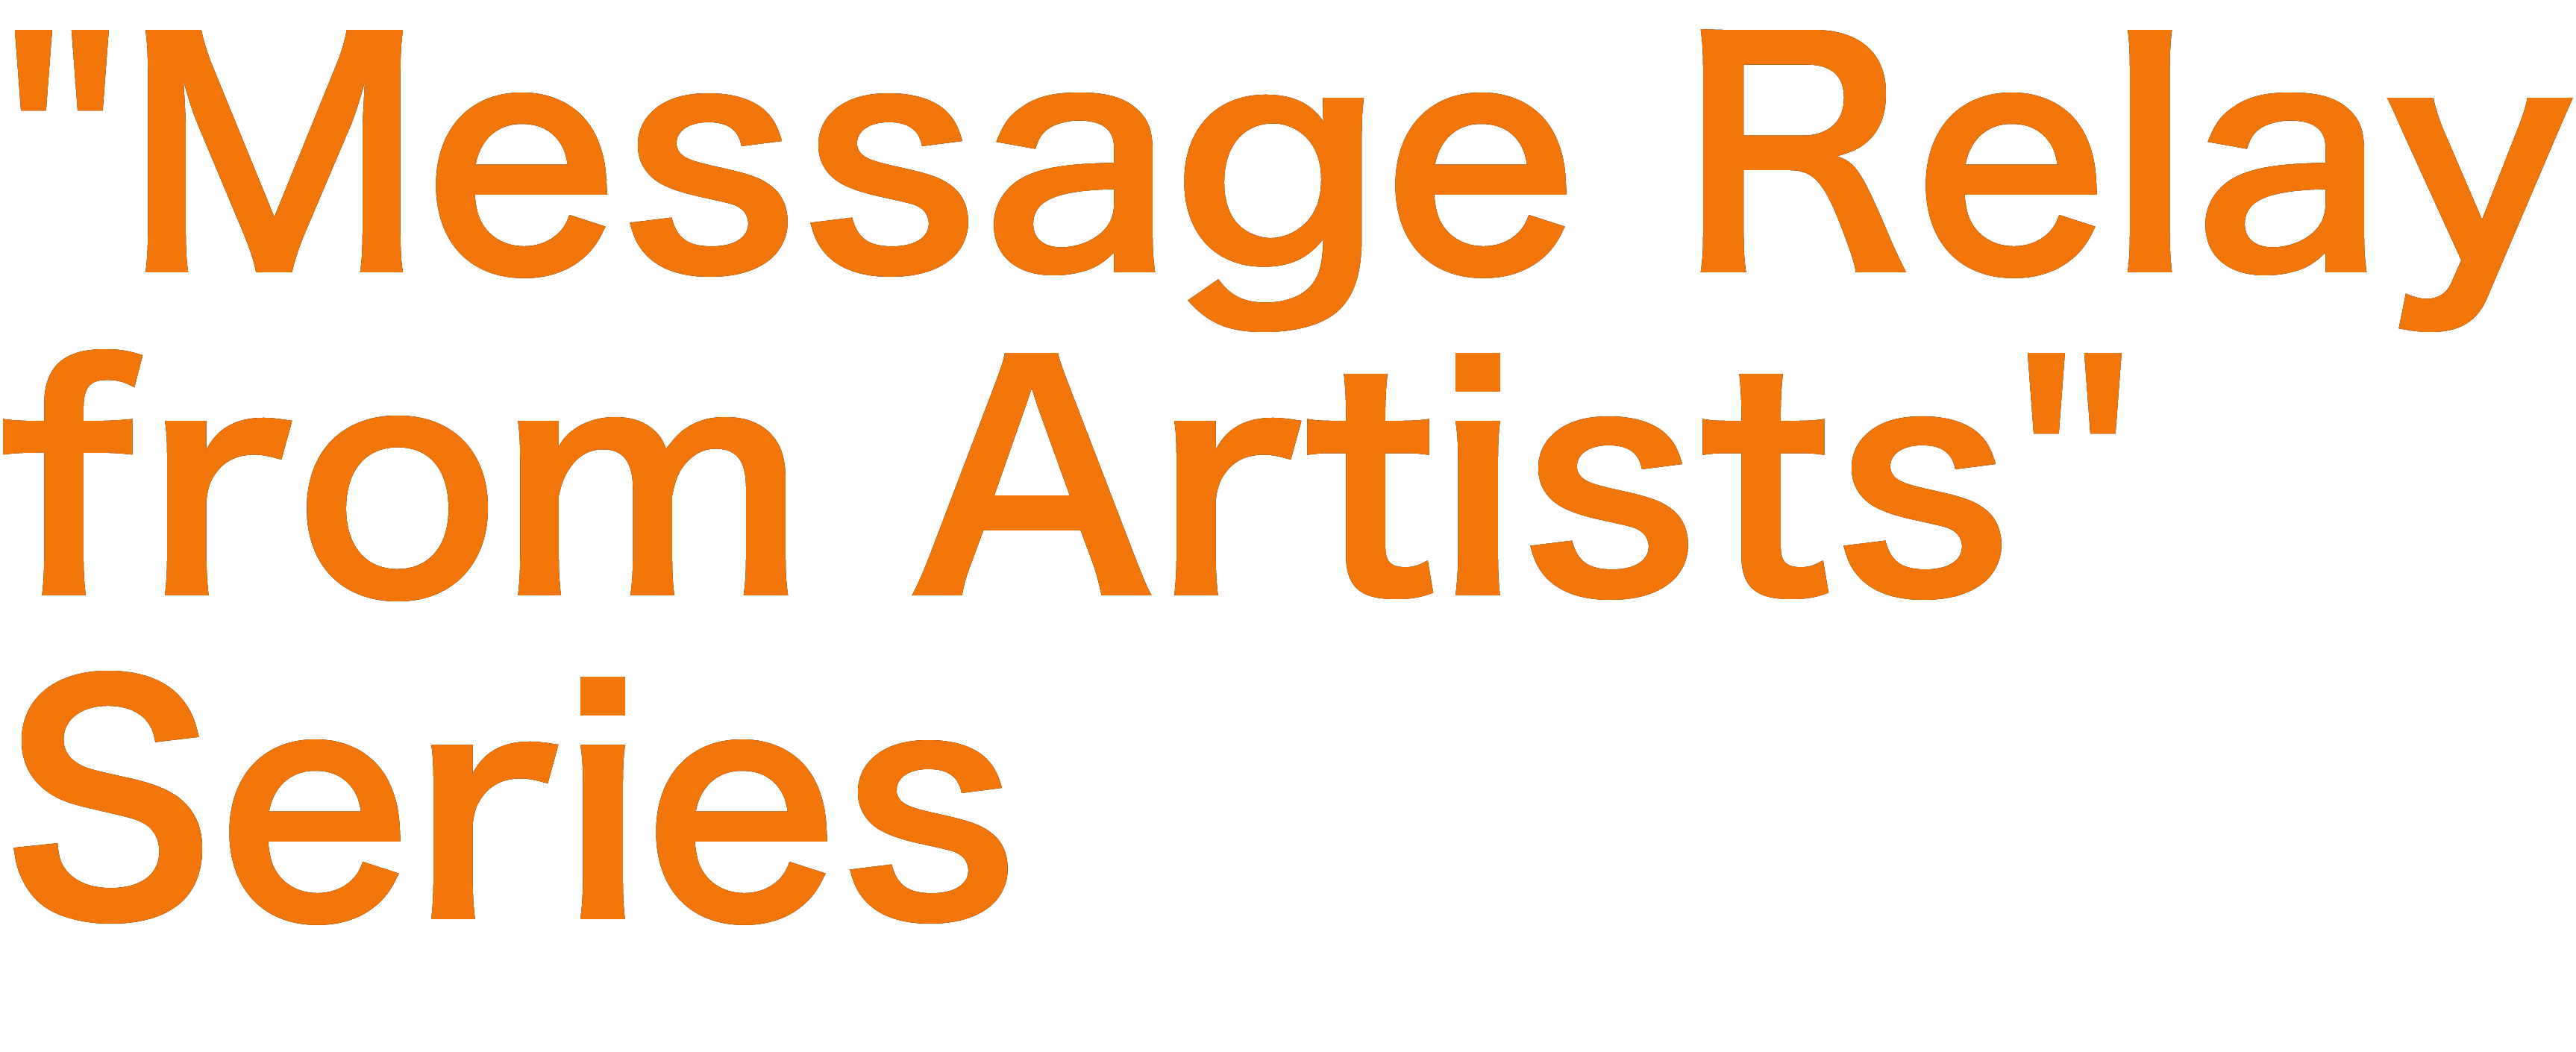 Message Relay from Artists